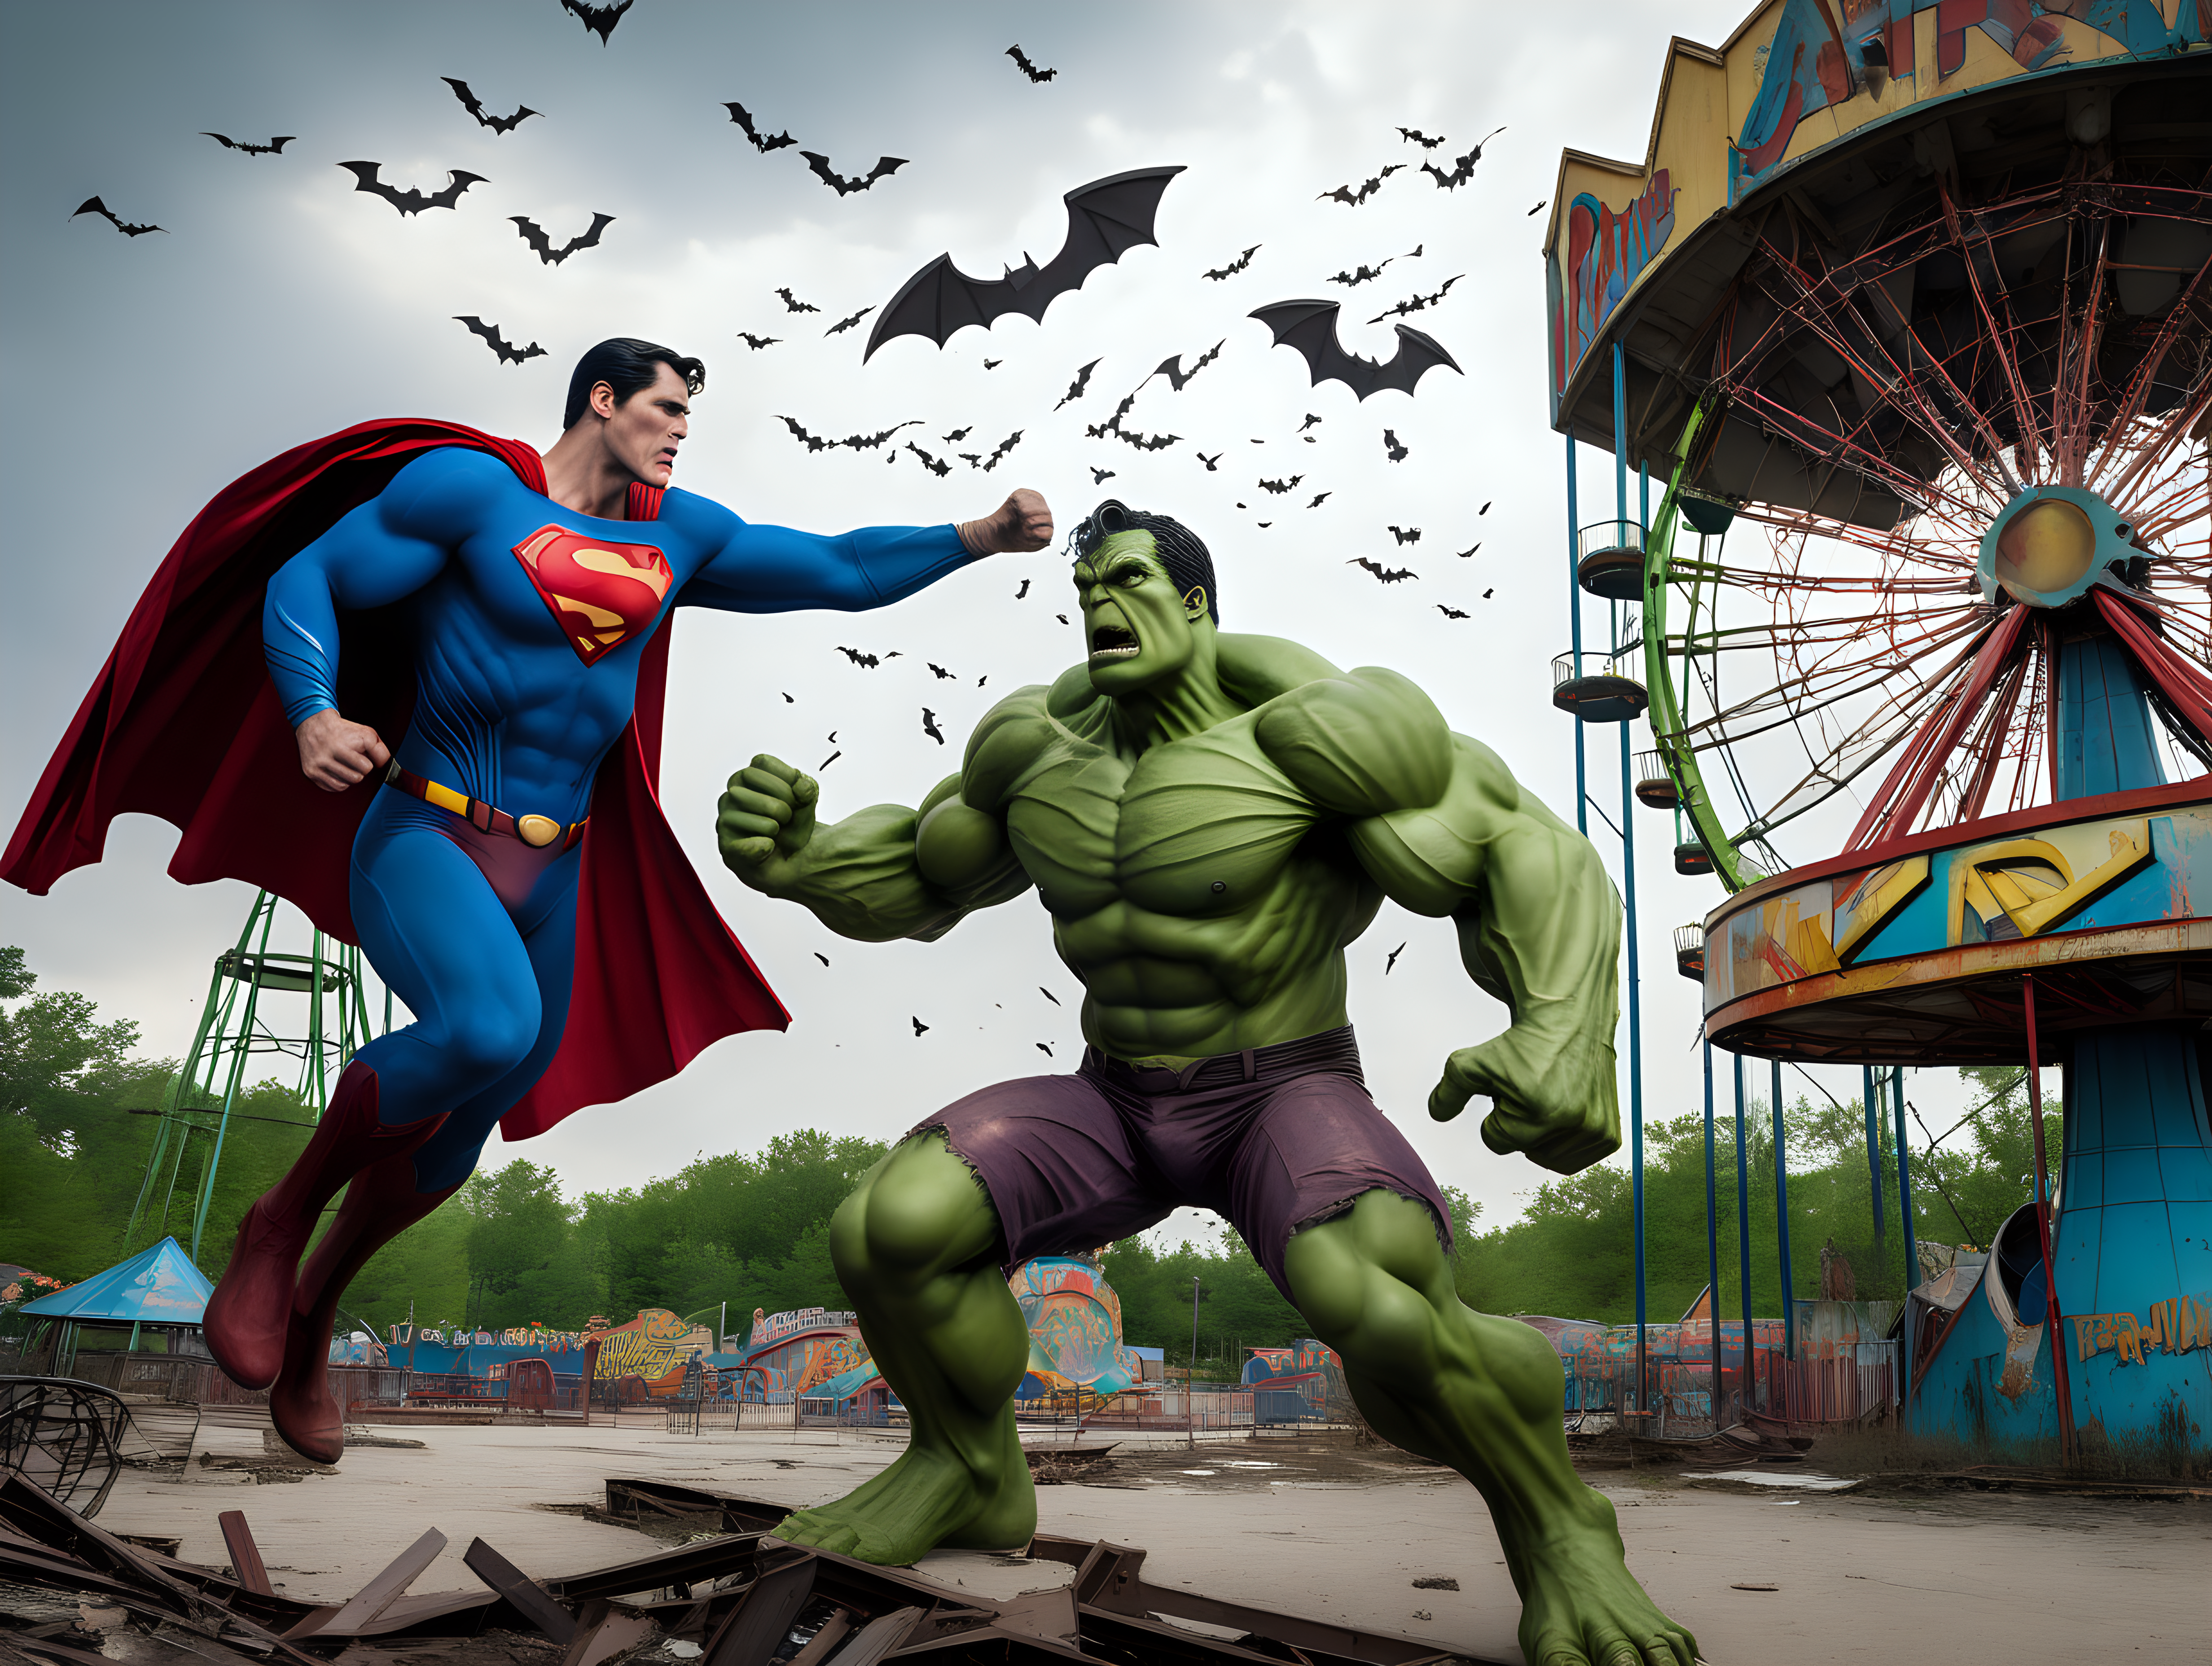 Superman fights the hulk in an abandon amusement park with bats flying overhead